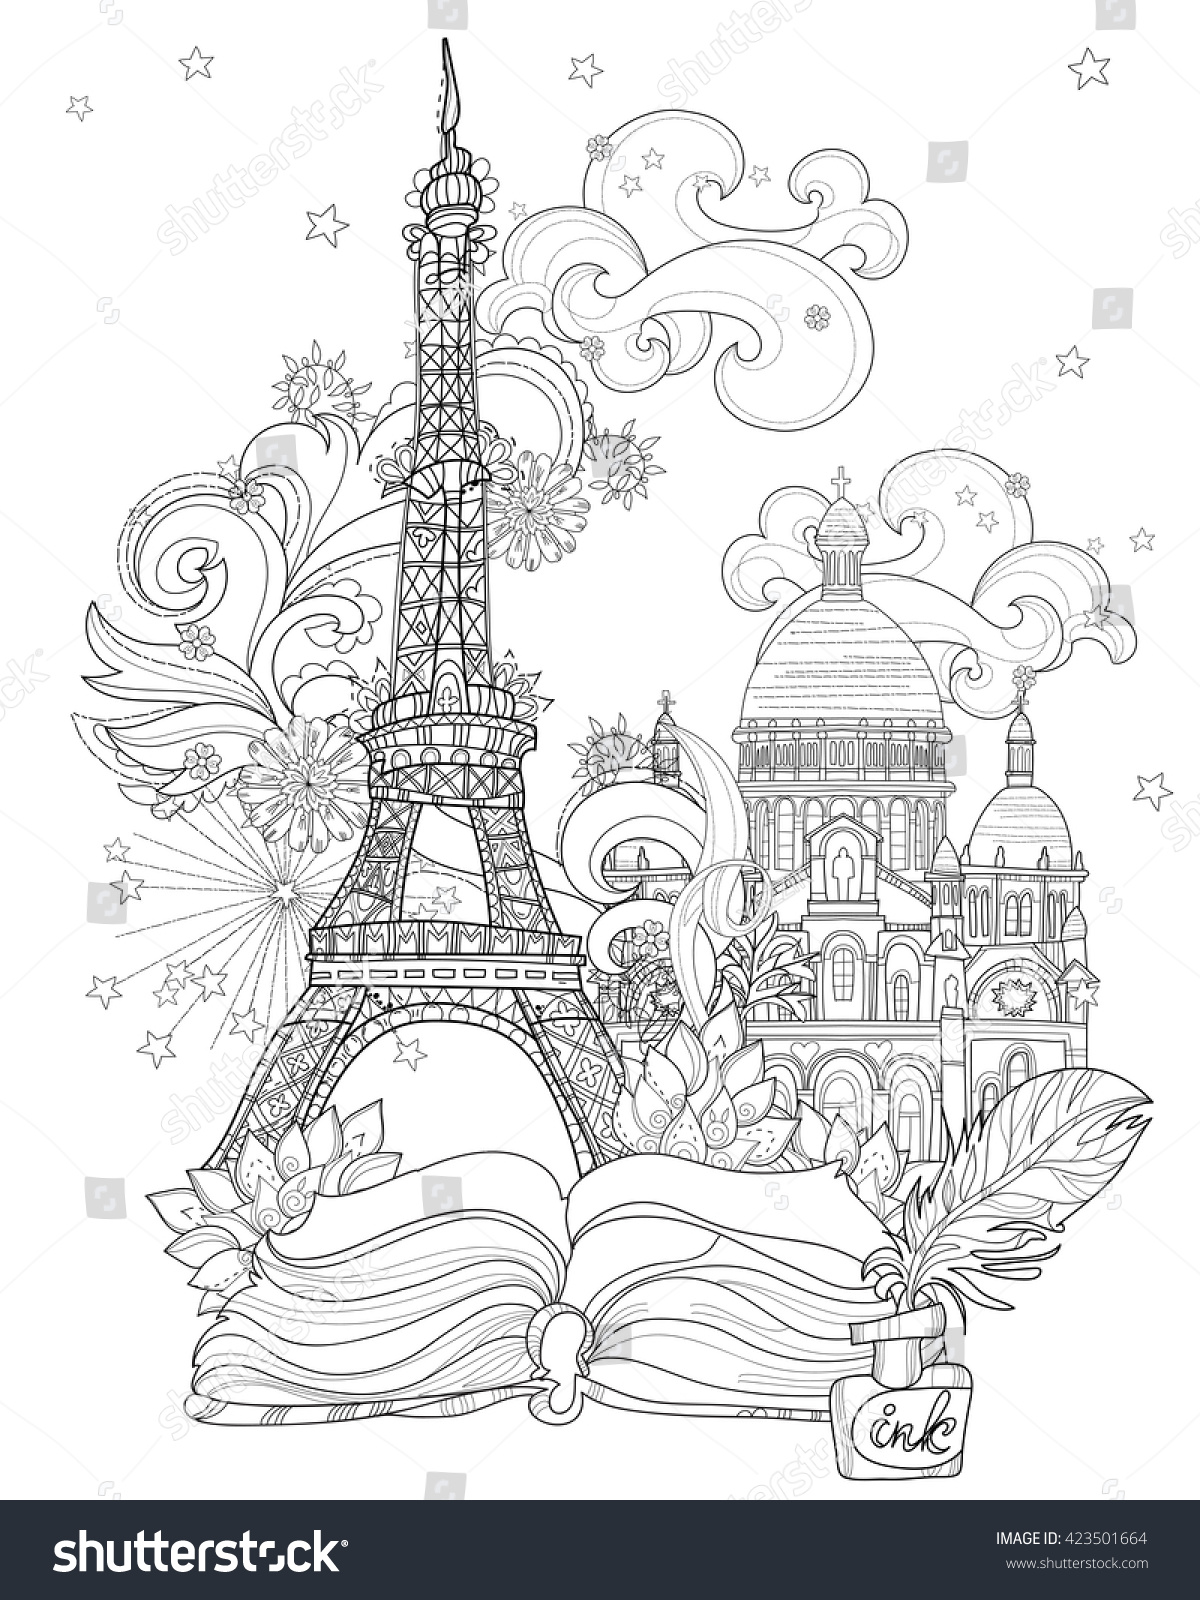 Zen art stylized Eiffel tower Hand Drawn vector illustration from story magic Sketch for poster